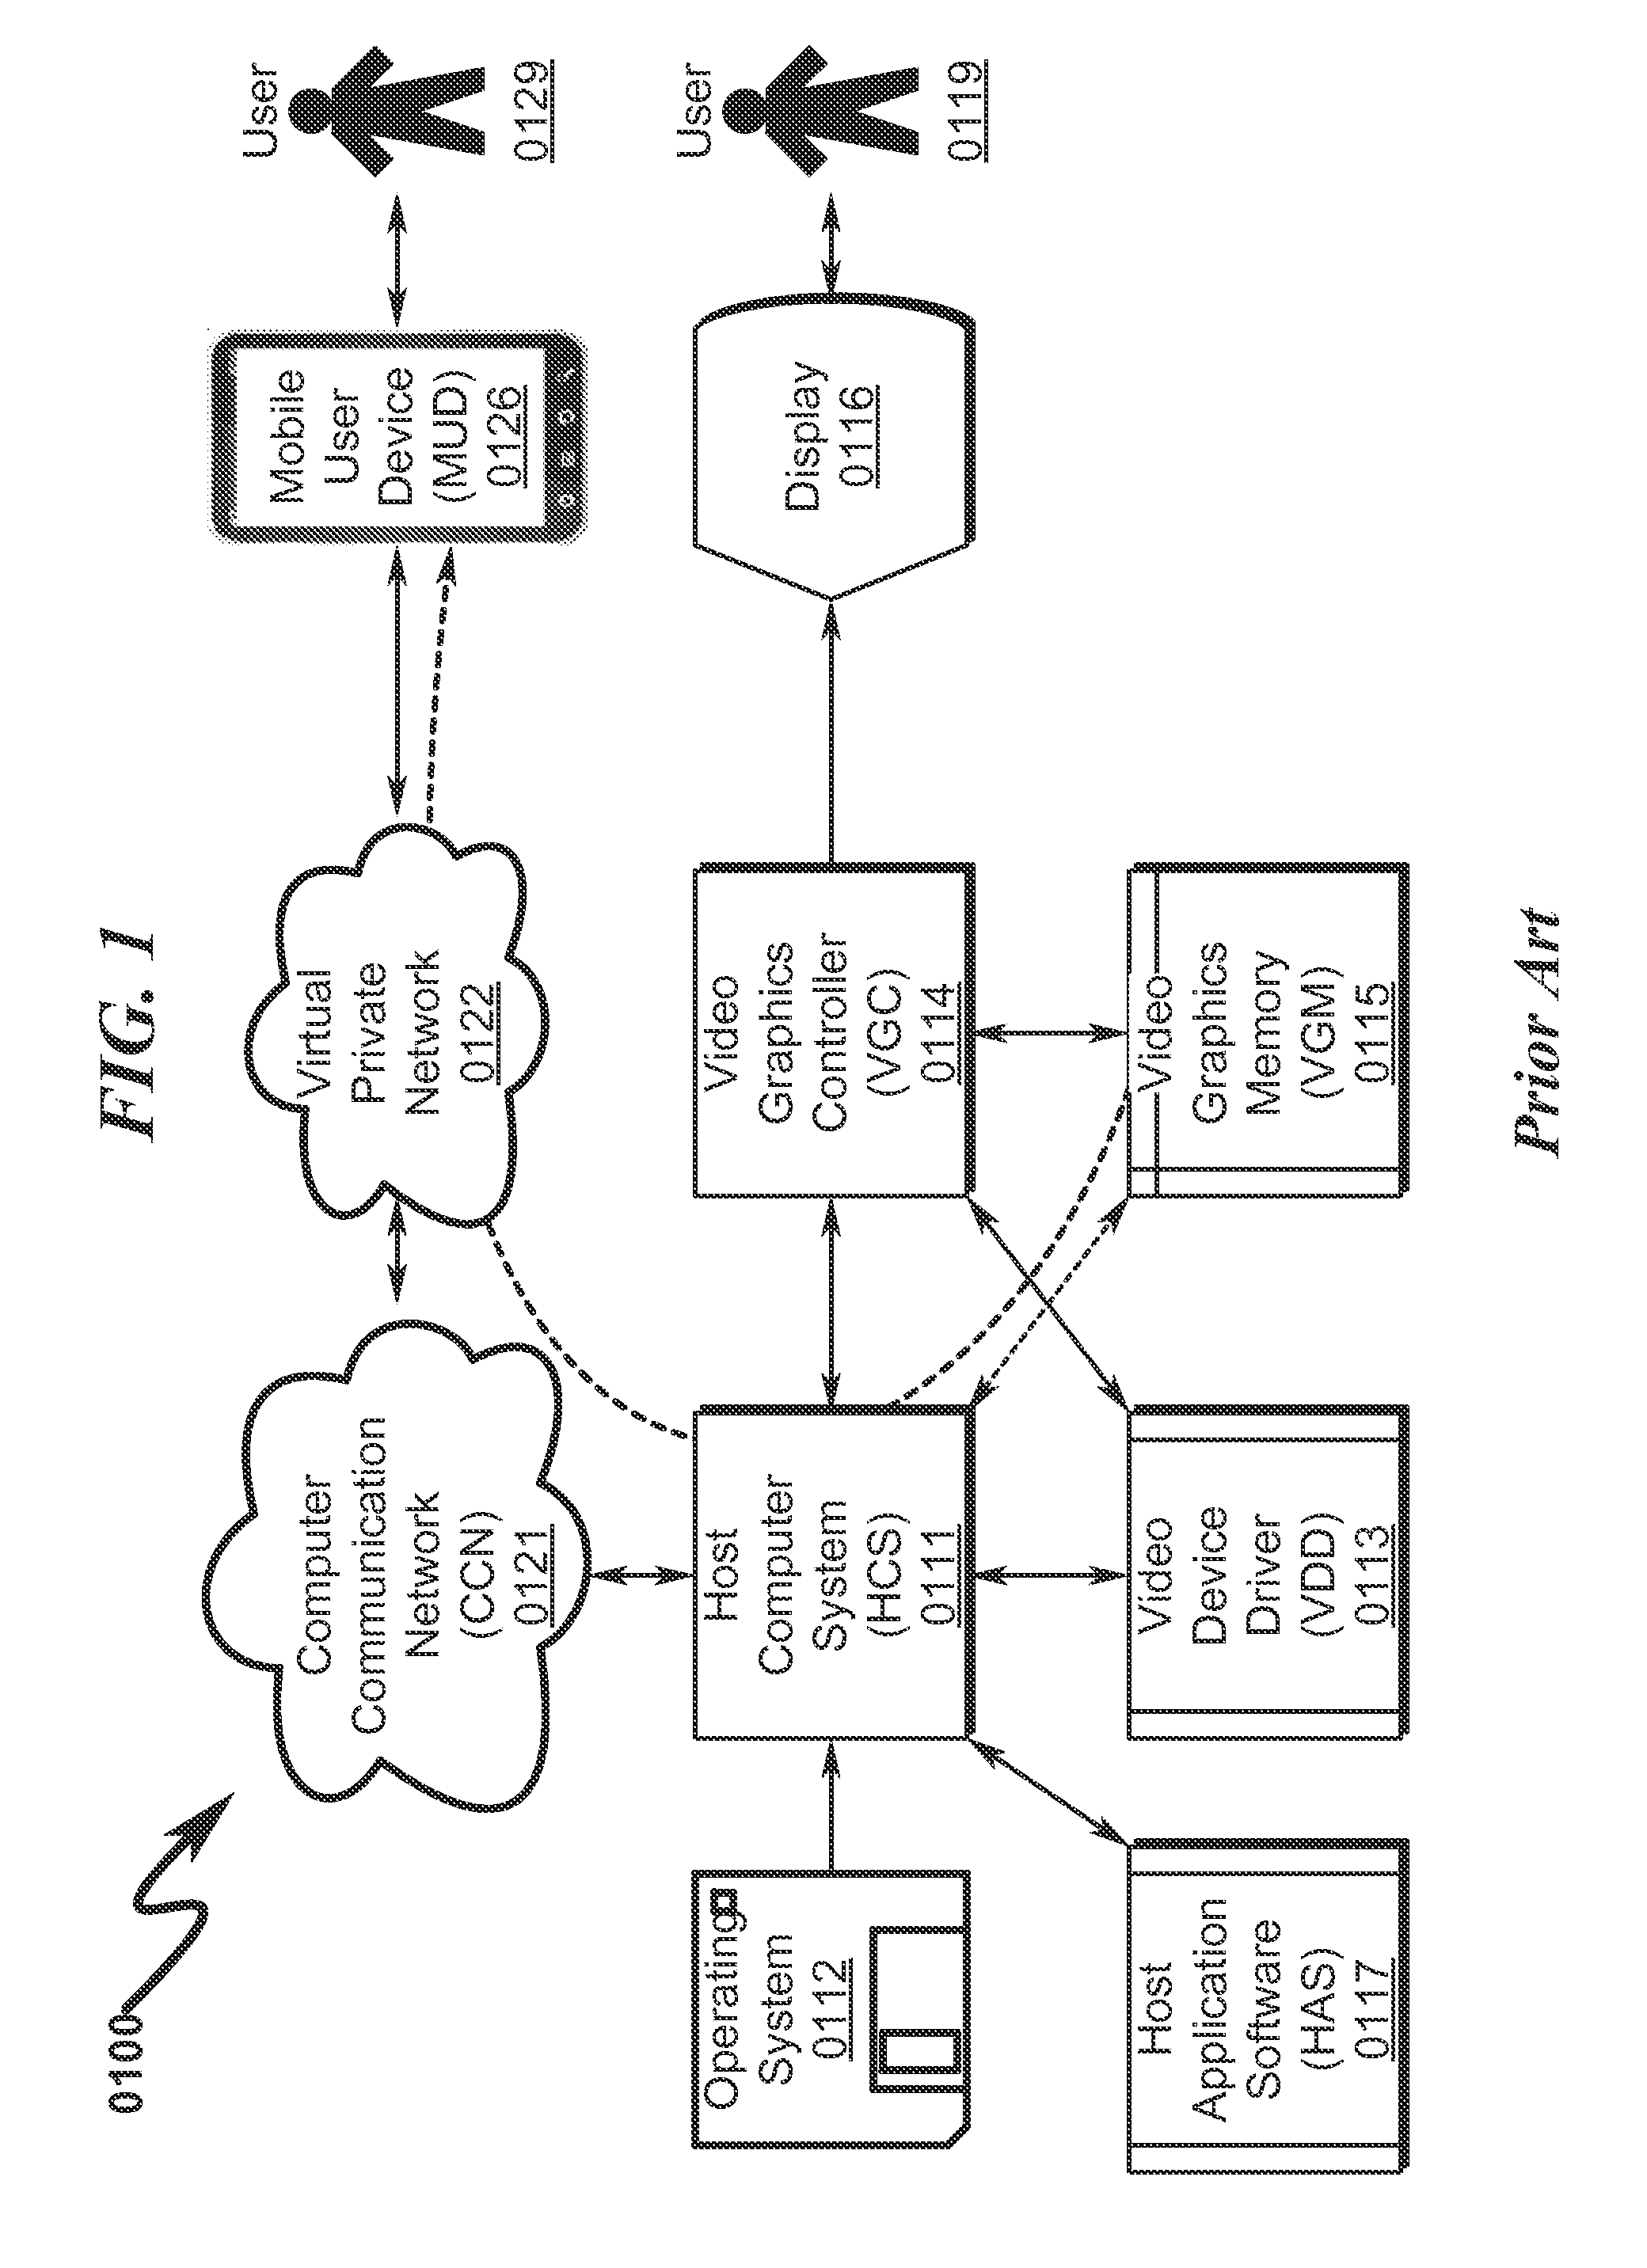 Multi-user display system and method